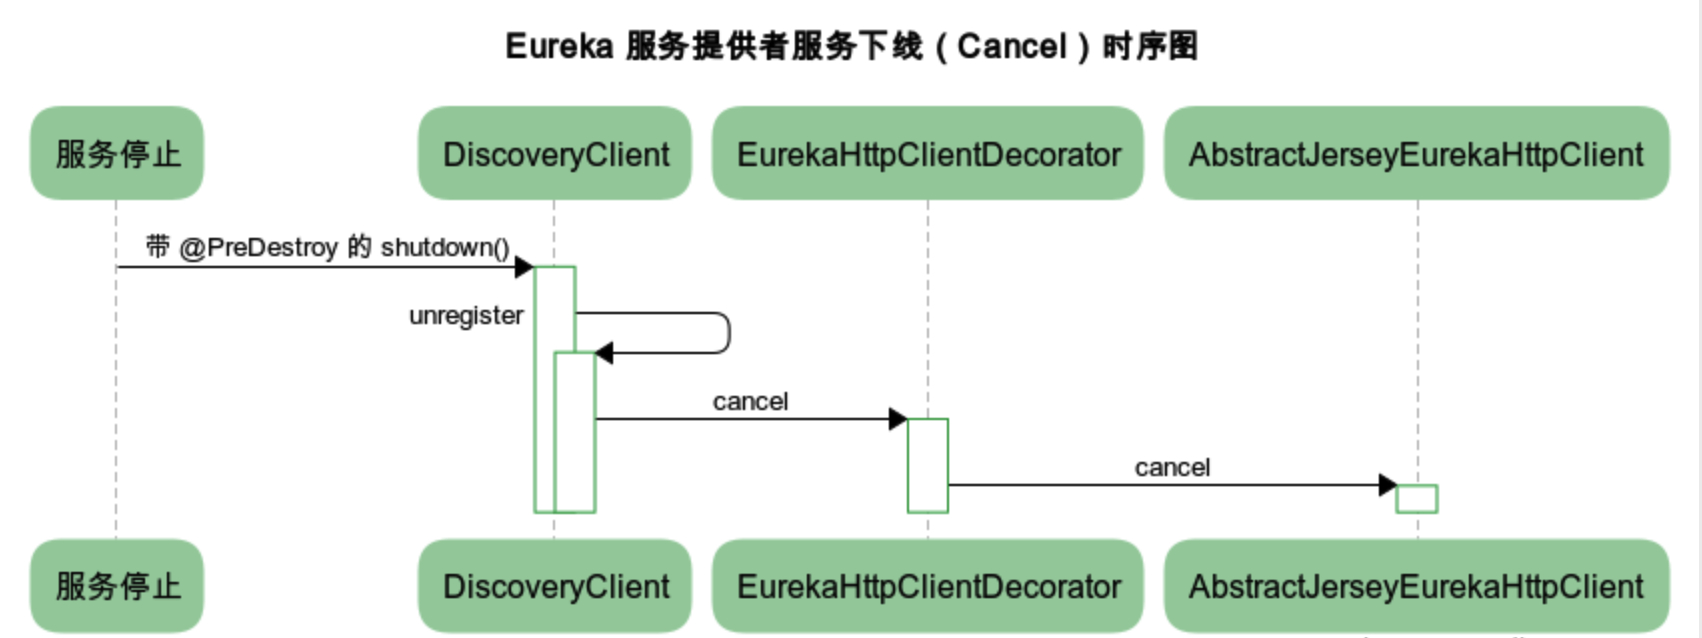 eureka-service-provider-cancel-sequence-chart.png